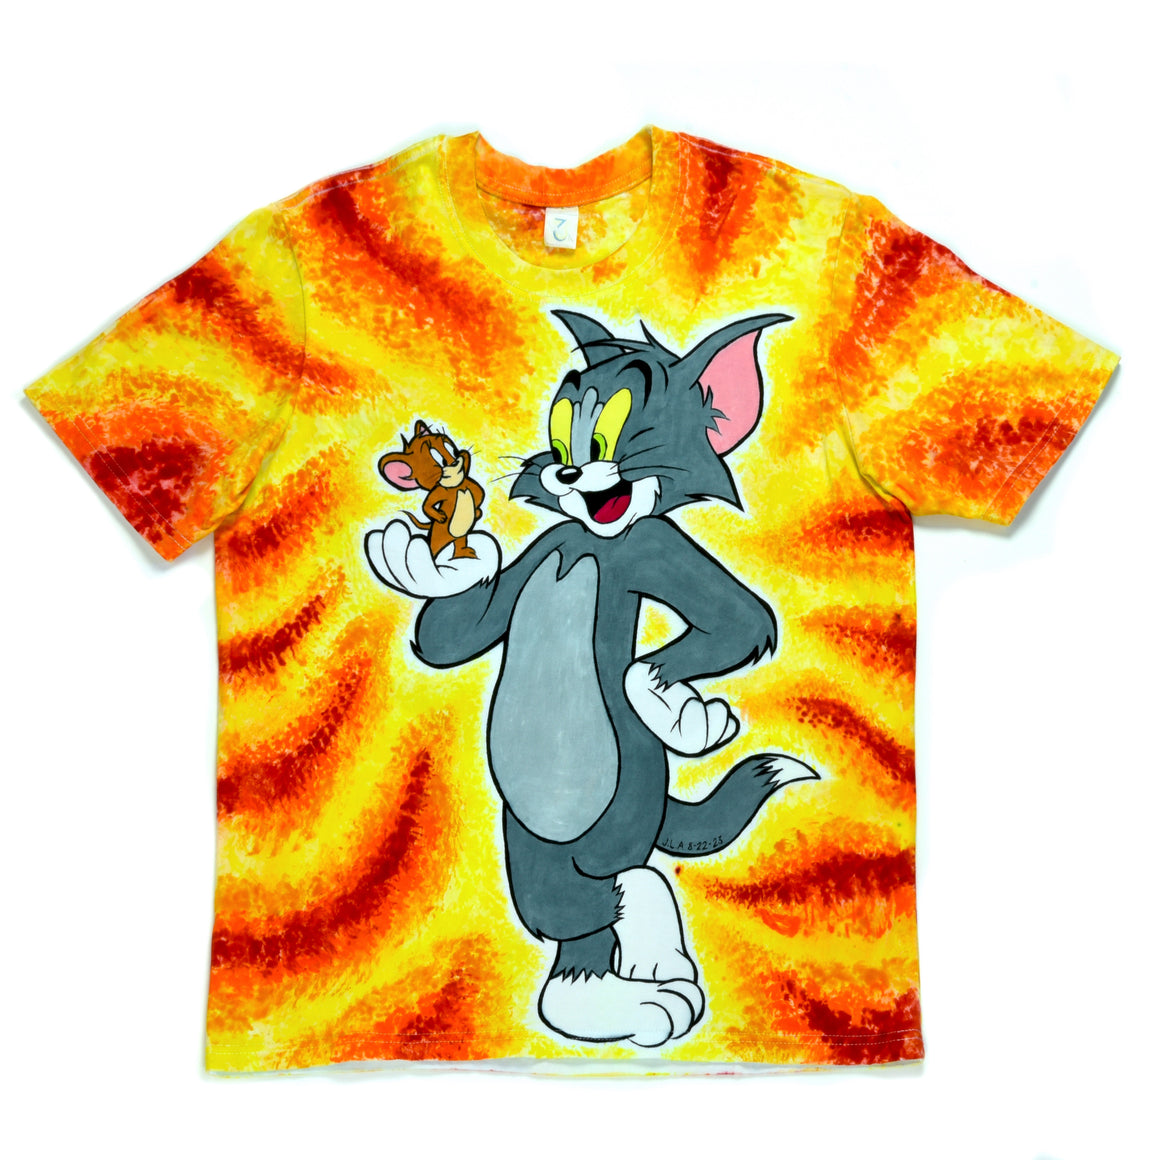 Medium - Hand-dyed T-Shirt - Tom and Jerry #1